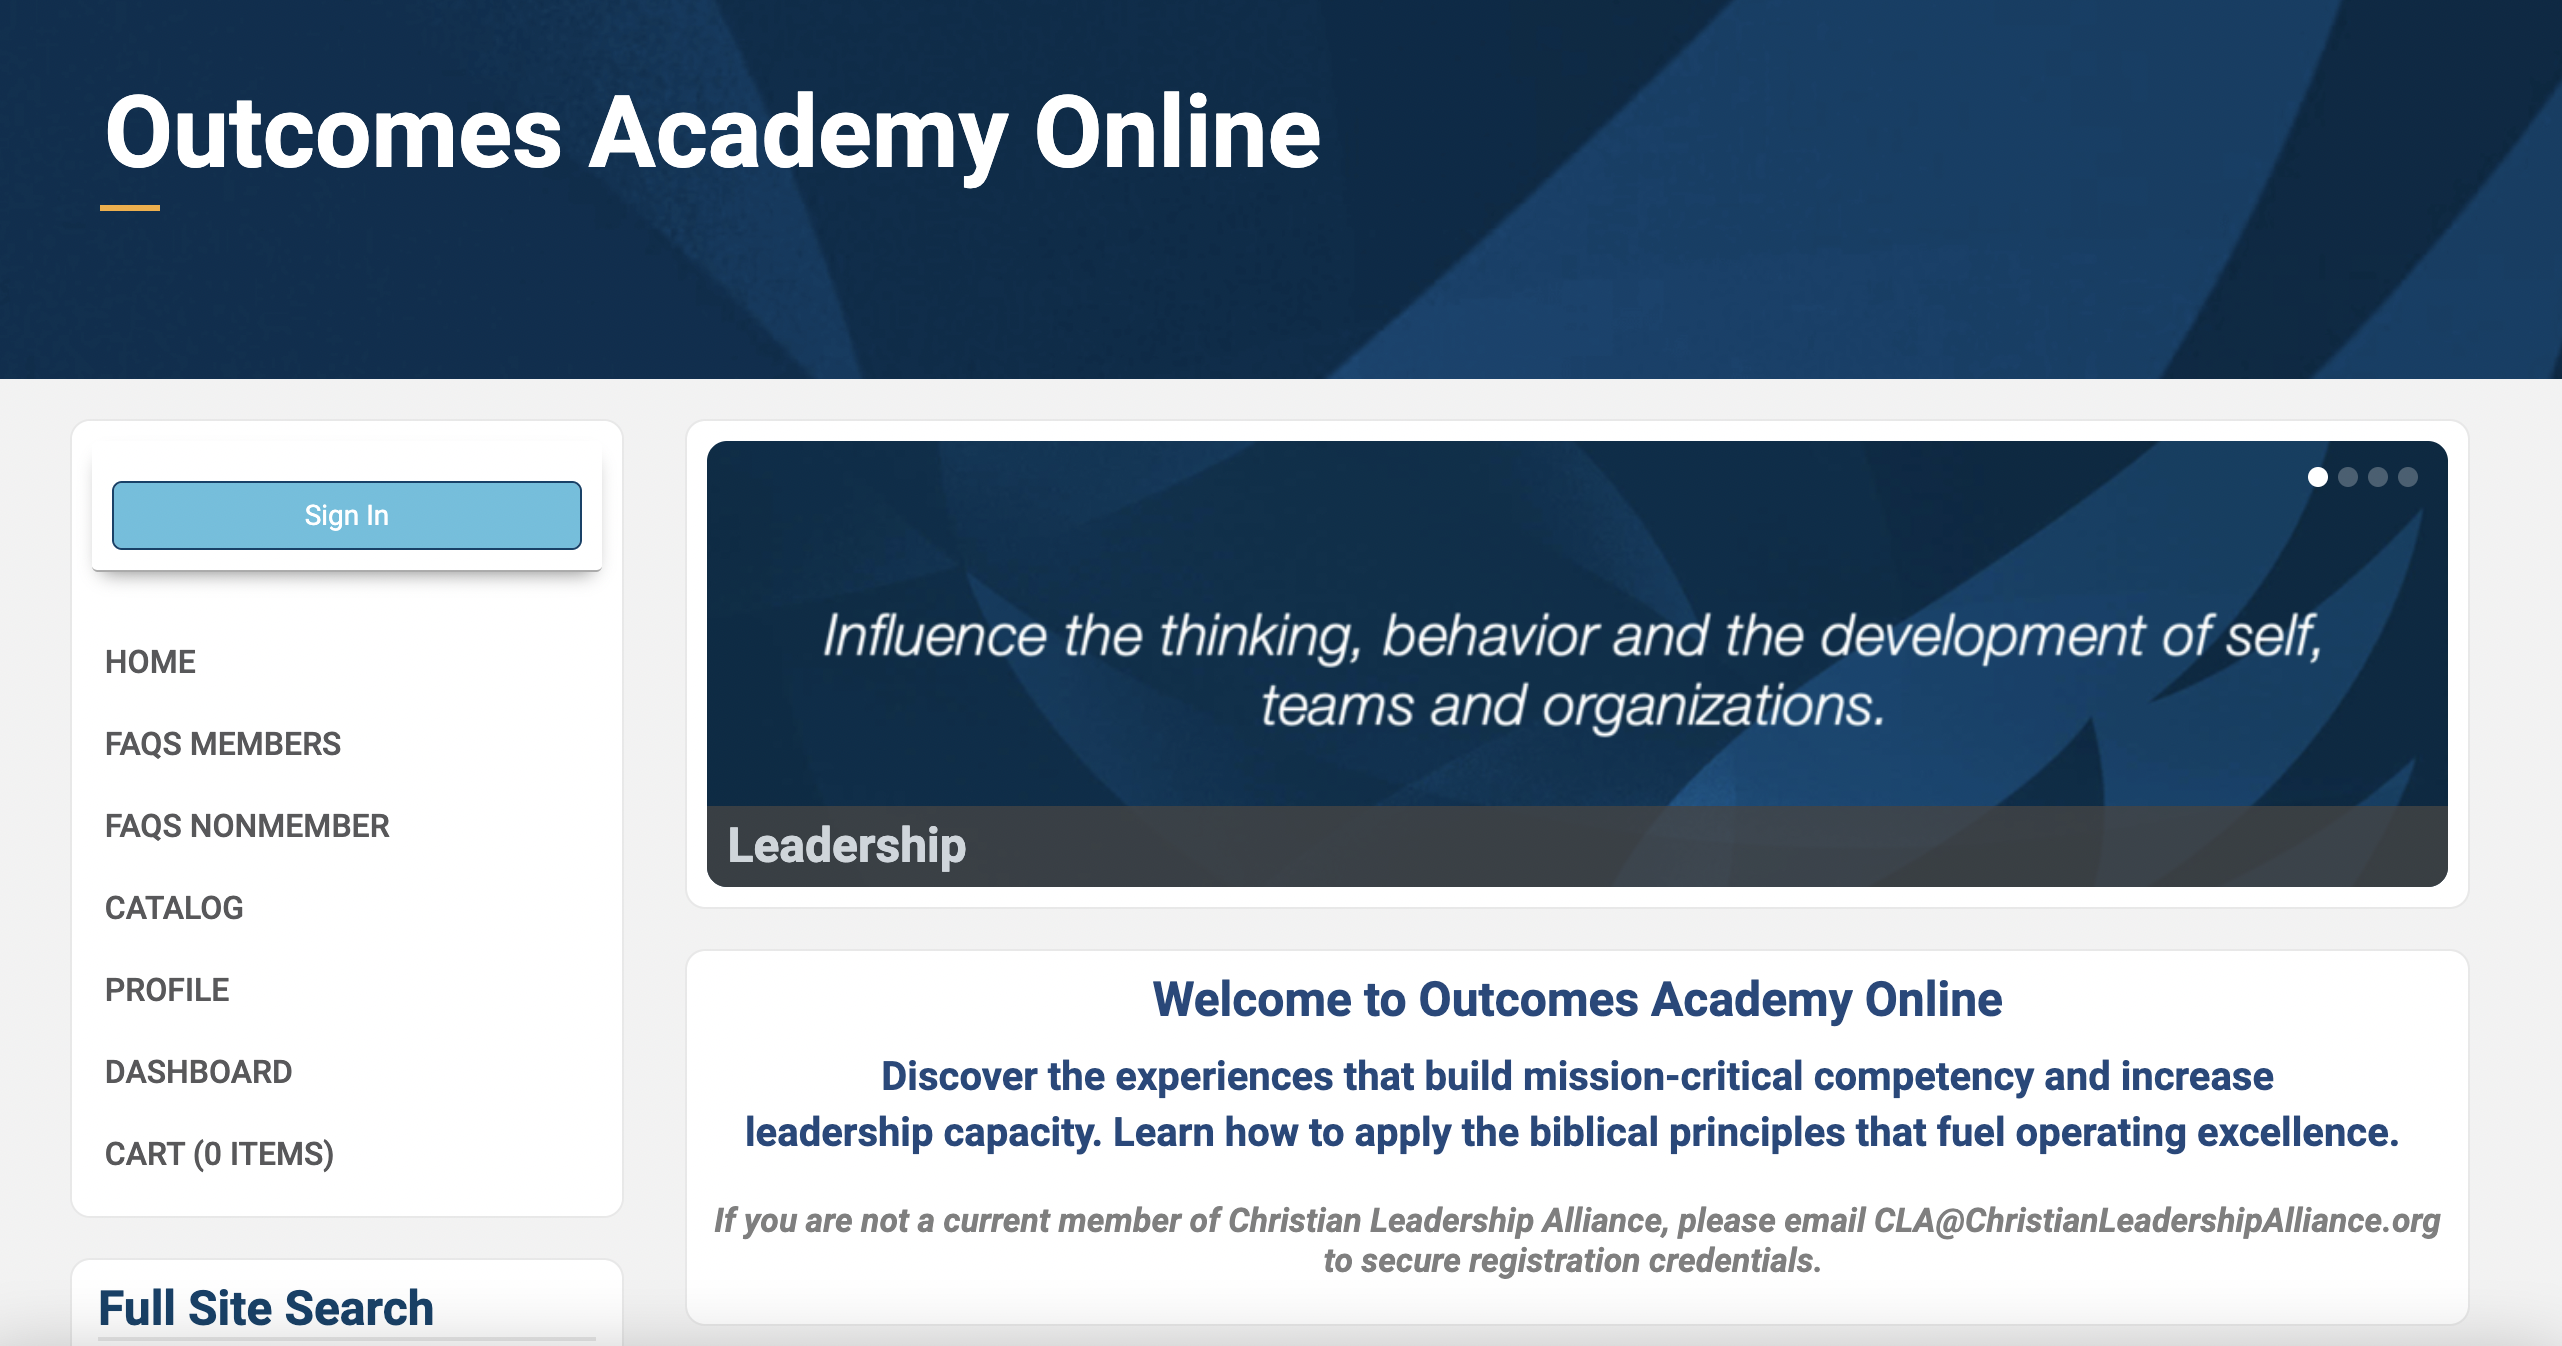 Outcomes Academy Online